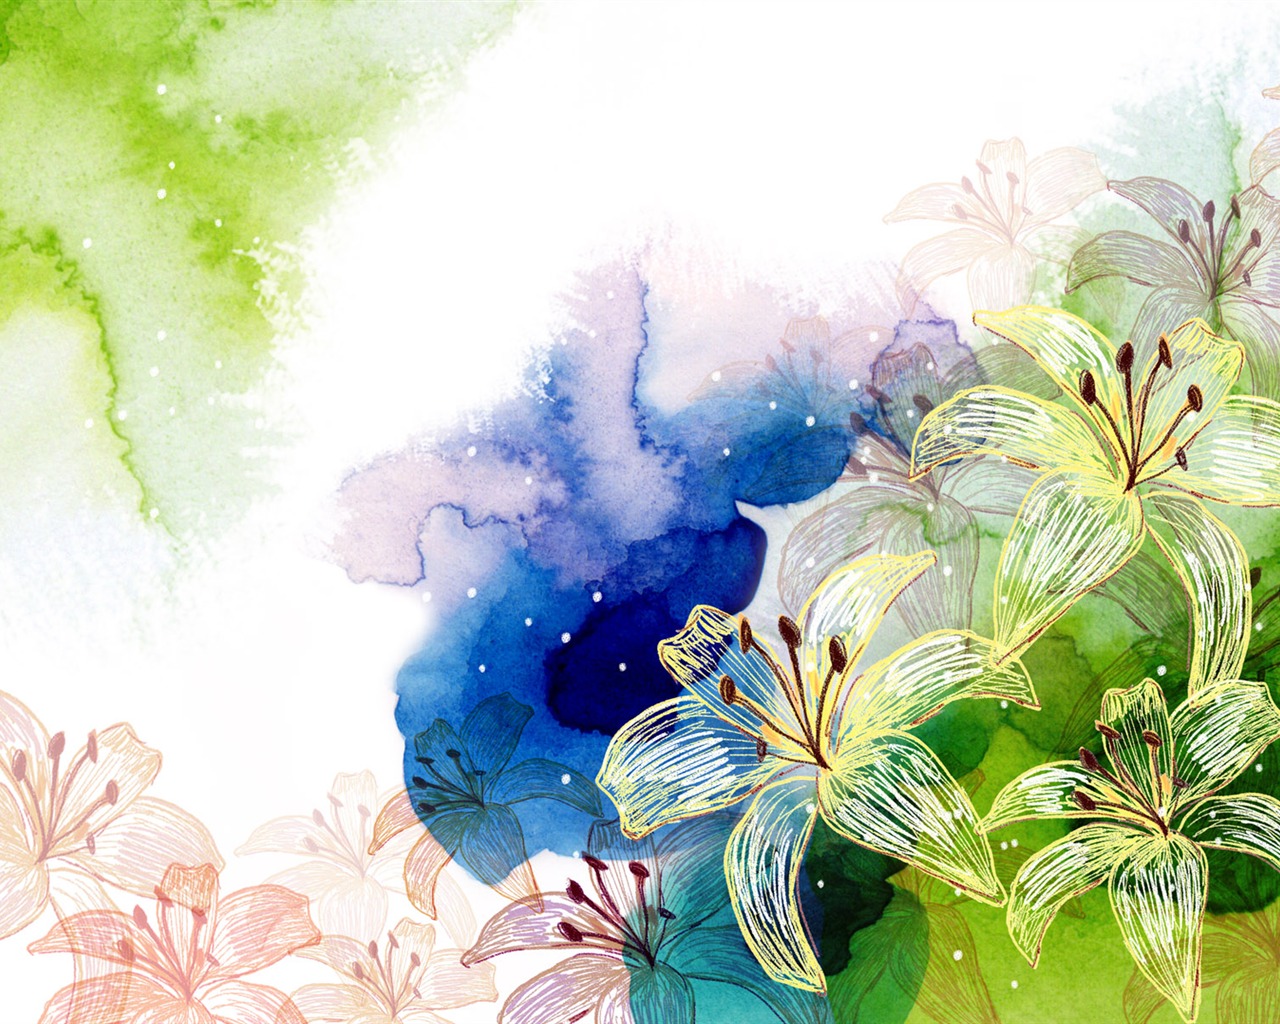 Synthetic Flower Wallpapers (2) #1 - 1280x1024